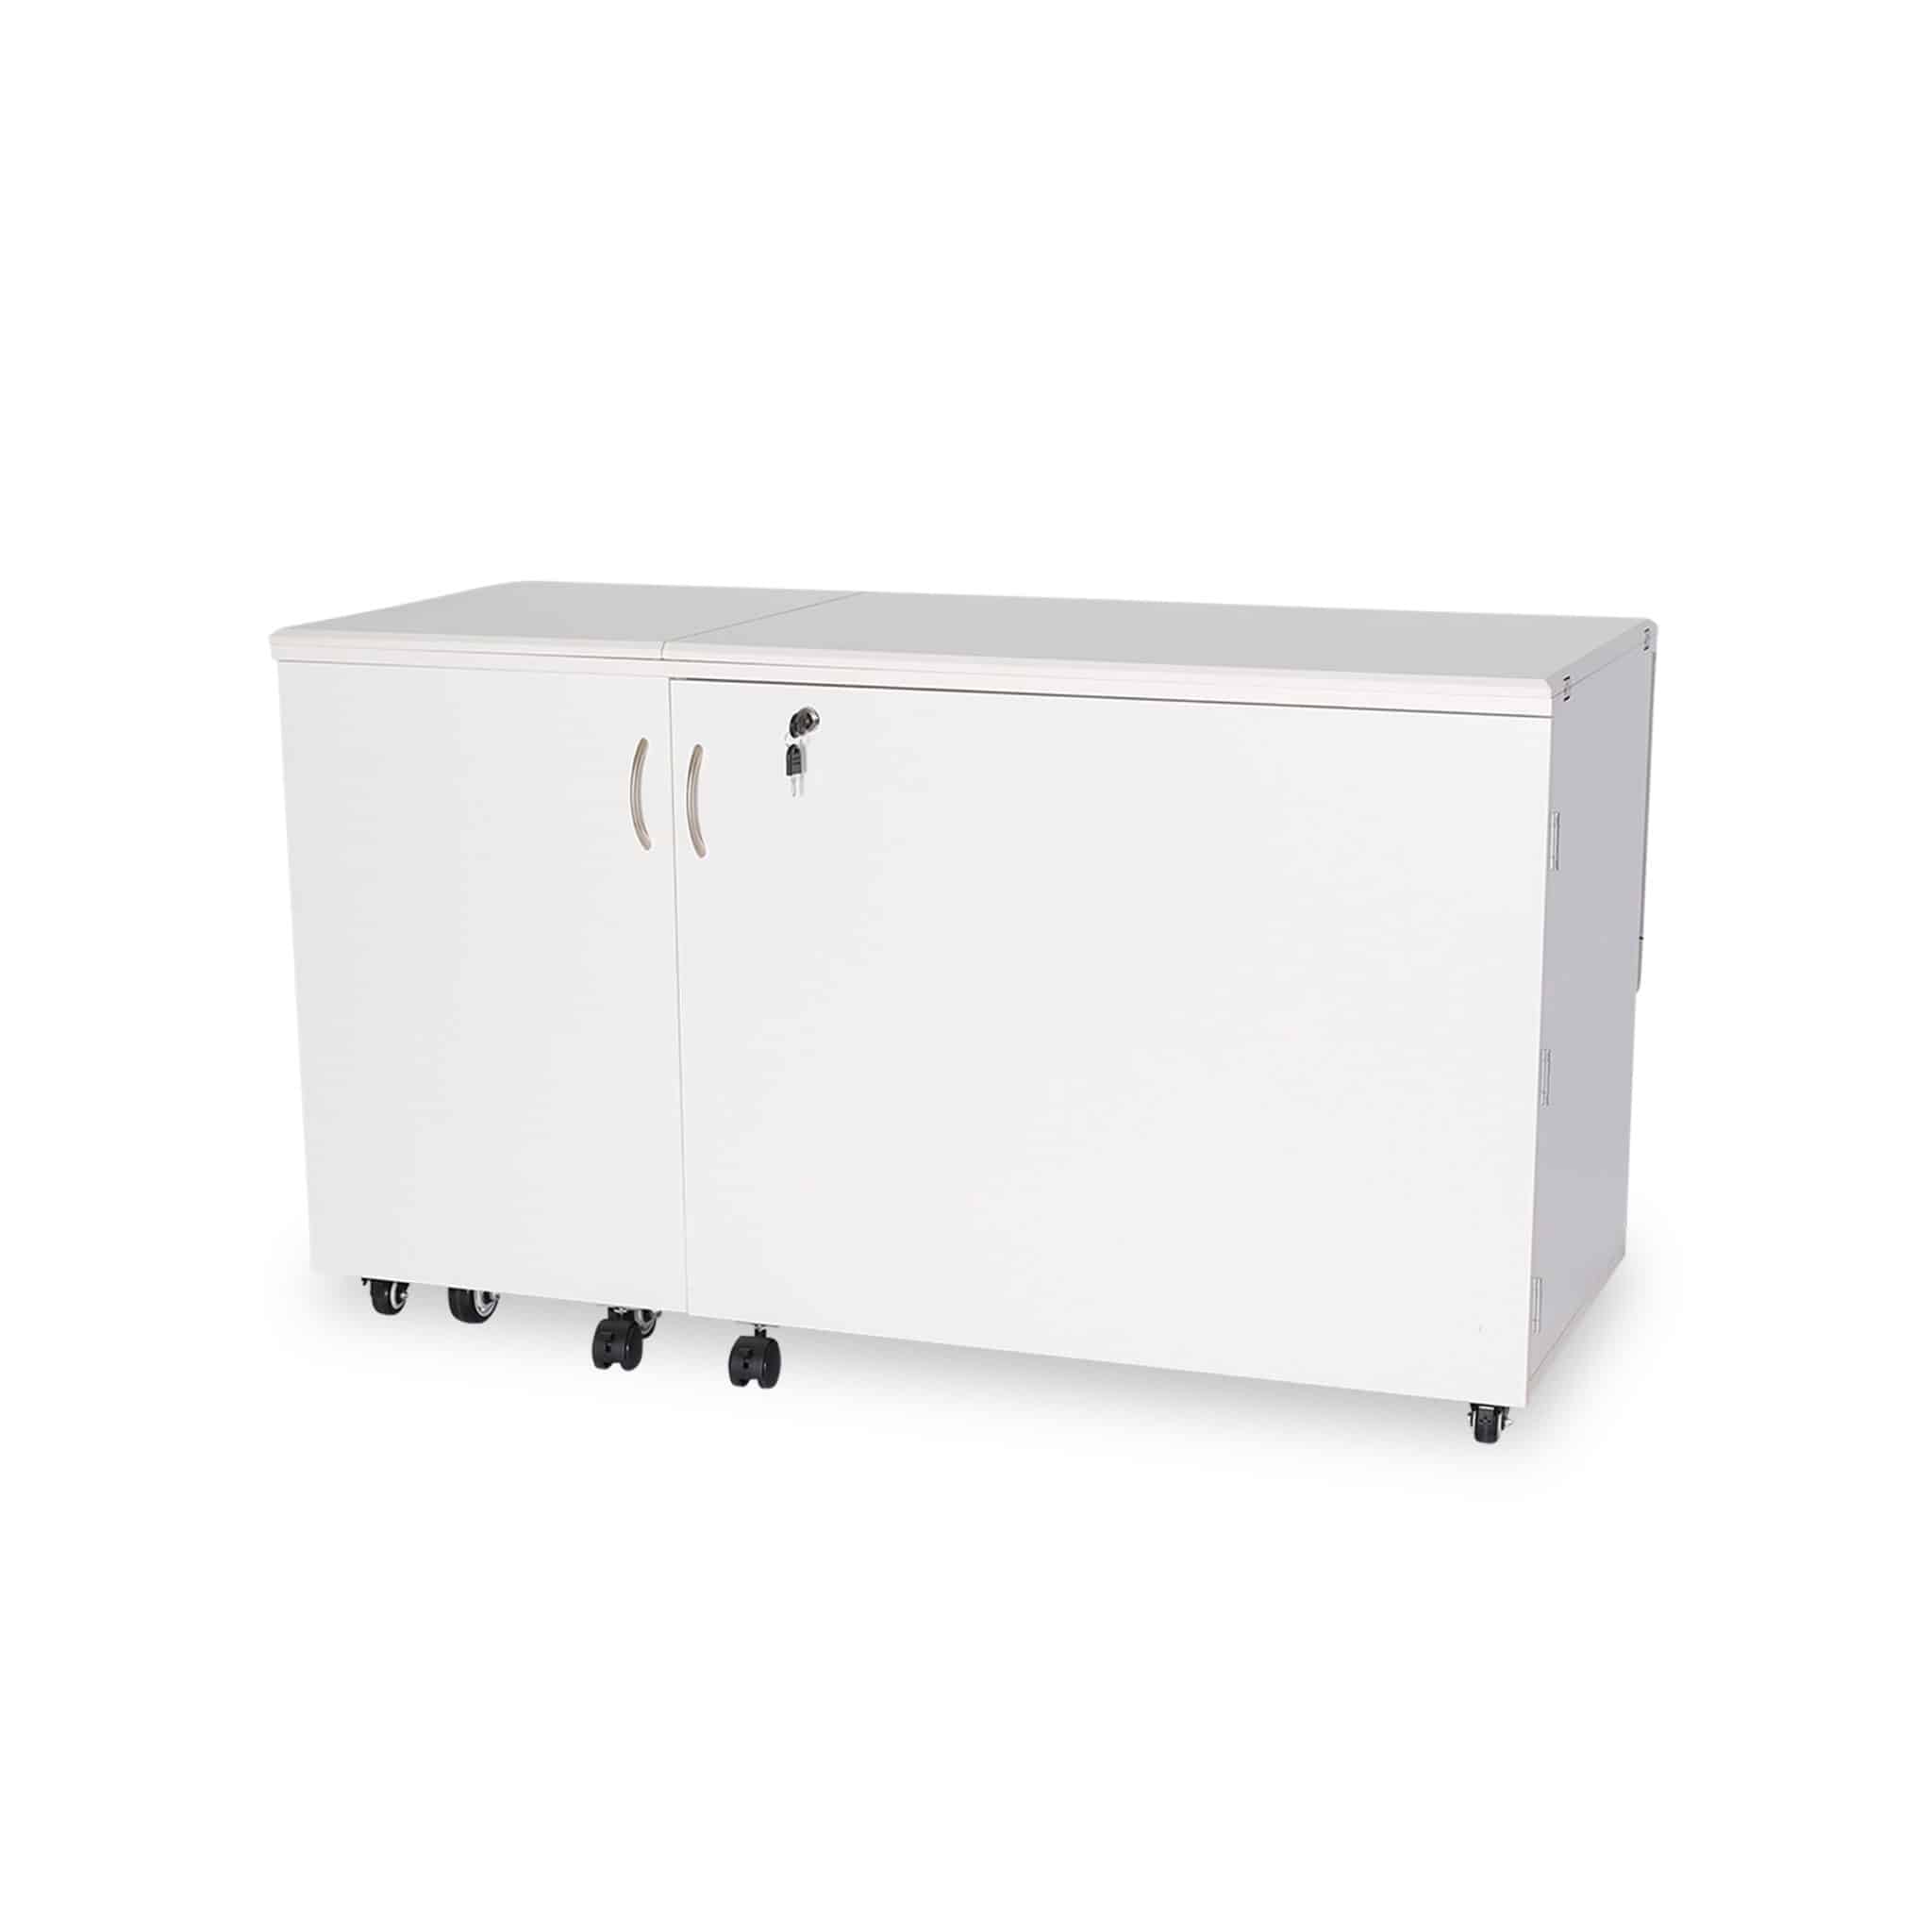 Outback Electric Sewing Cabinet offers luxury features such as a programmable electric lift. Adaptable to multiple sewing configurations. Show at Arrow Sewing.